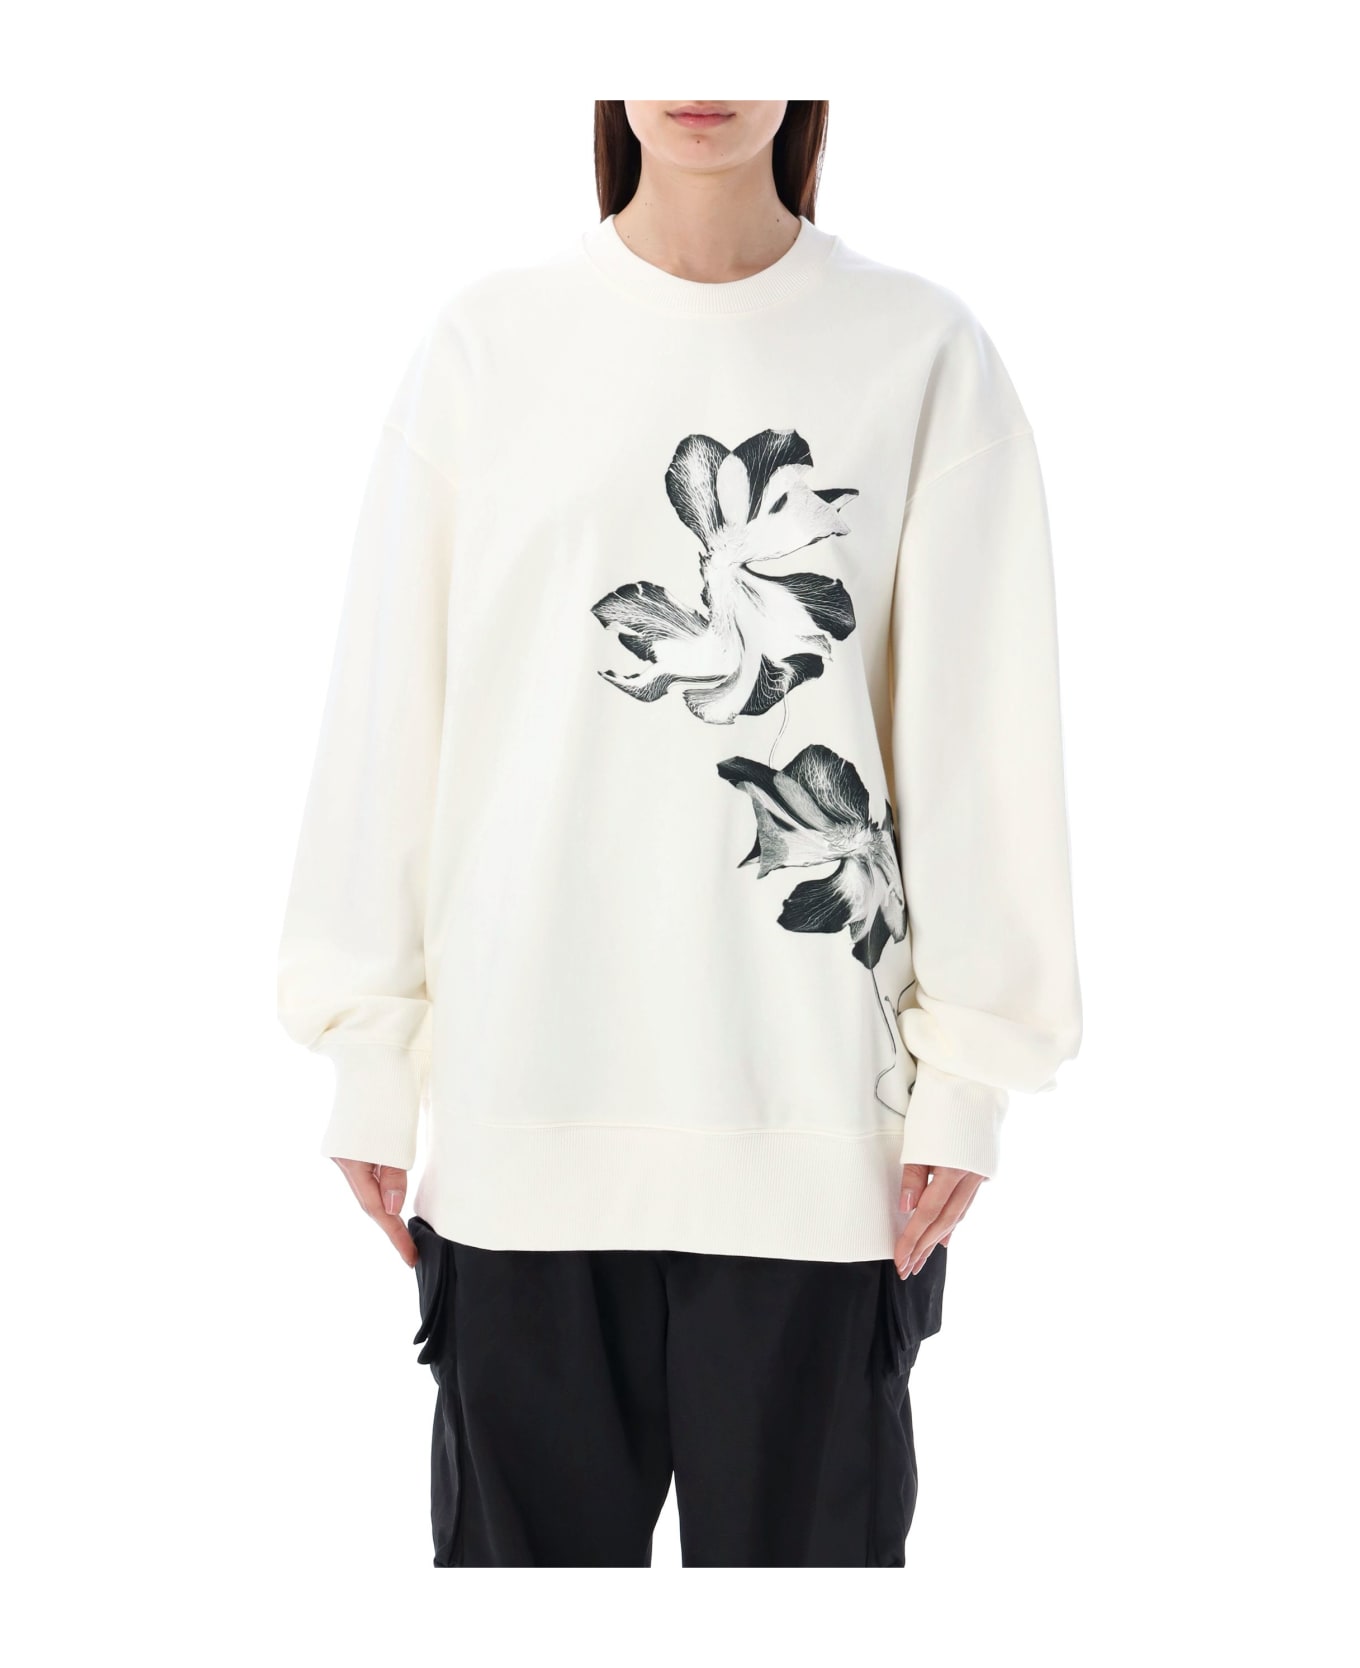 Y-3 Graphic French Terry Sweatshirt - WHITE